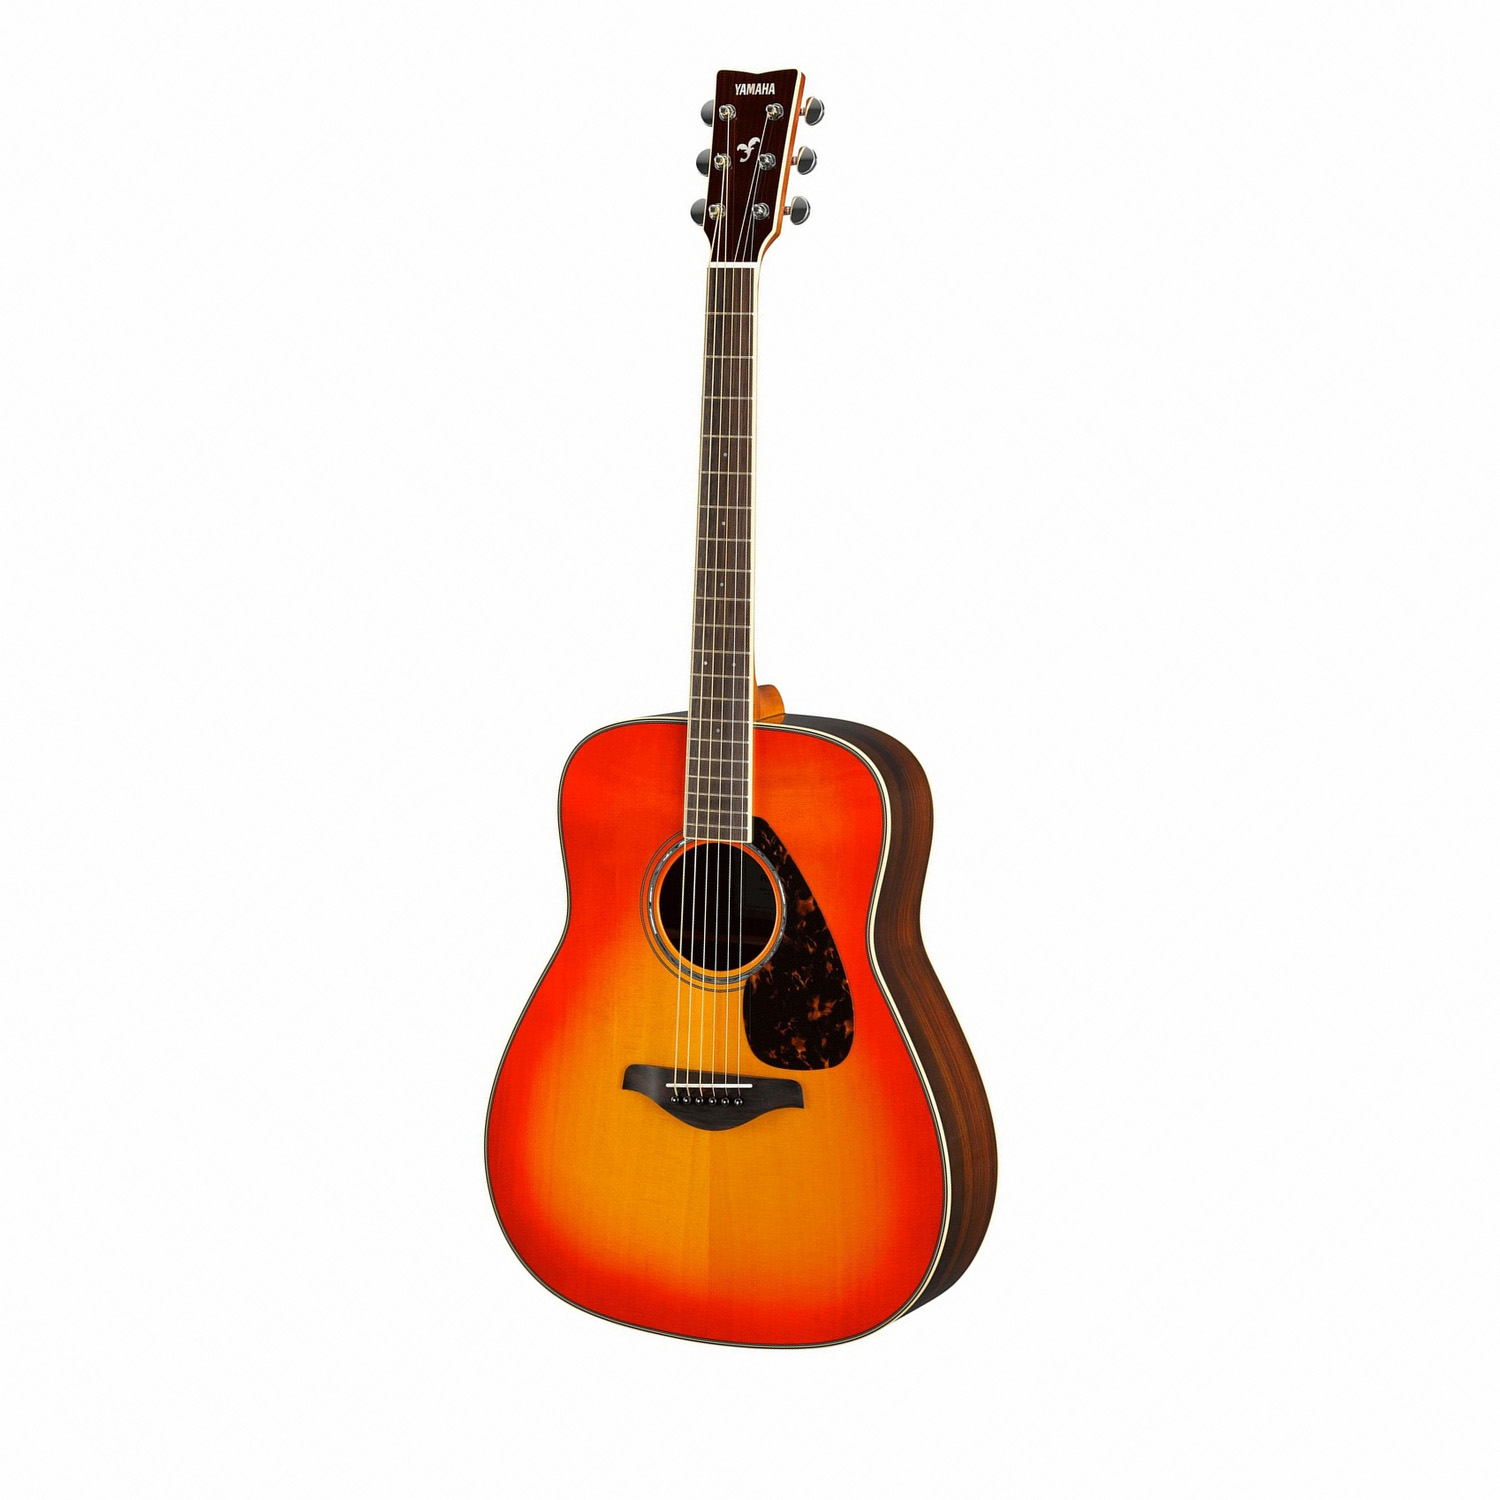 Martin Guitar To Debut Special And Limited Edition Models